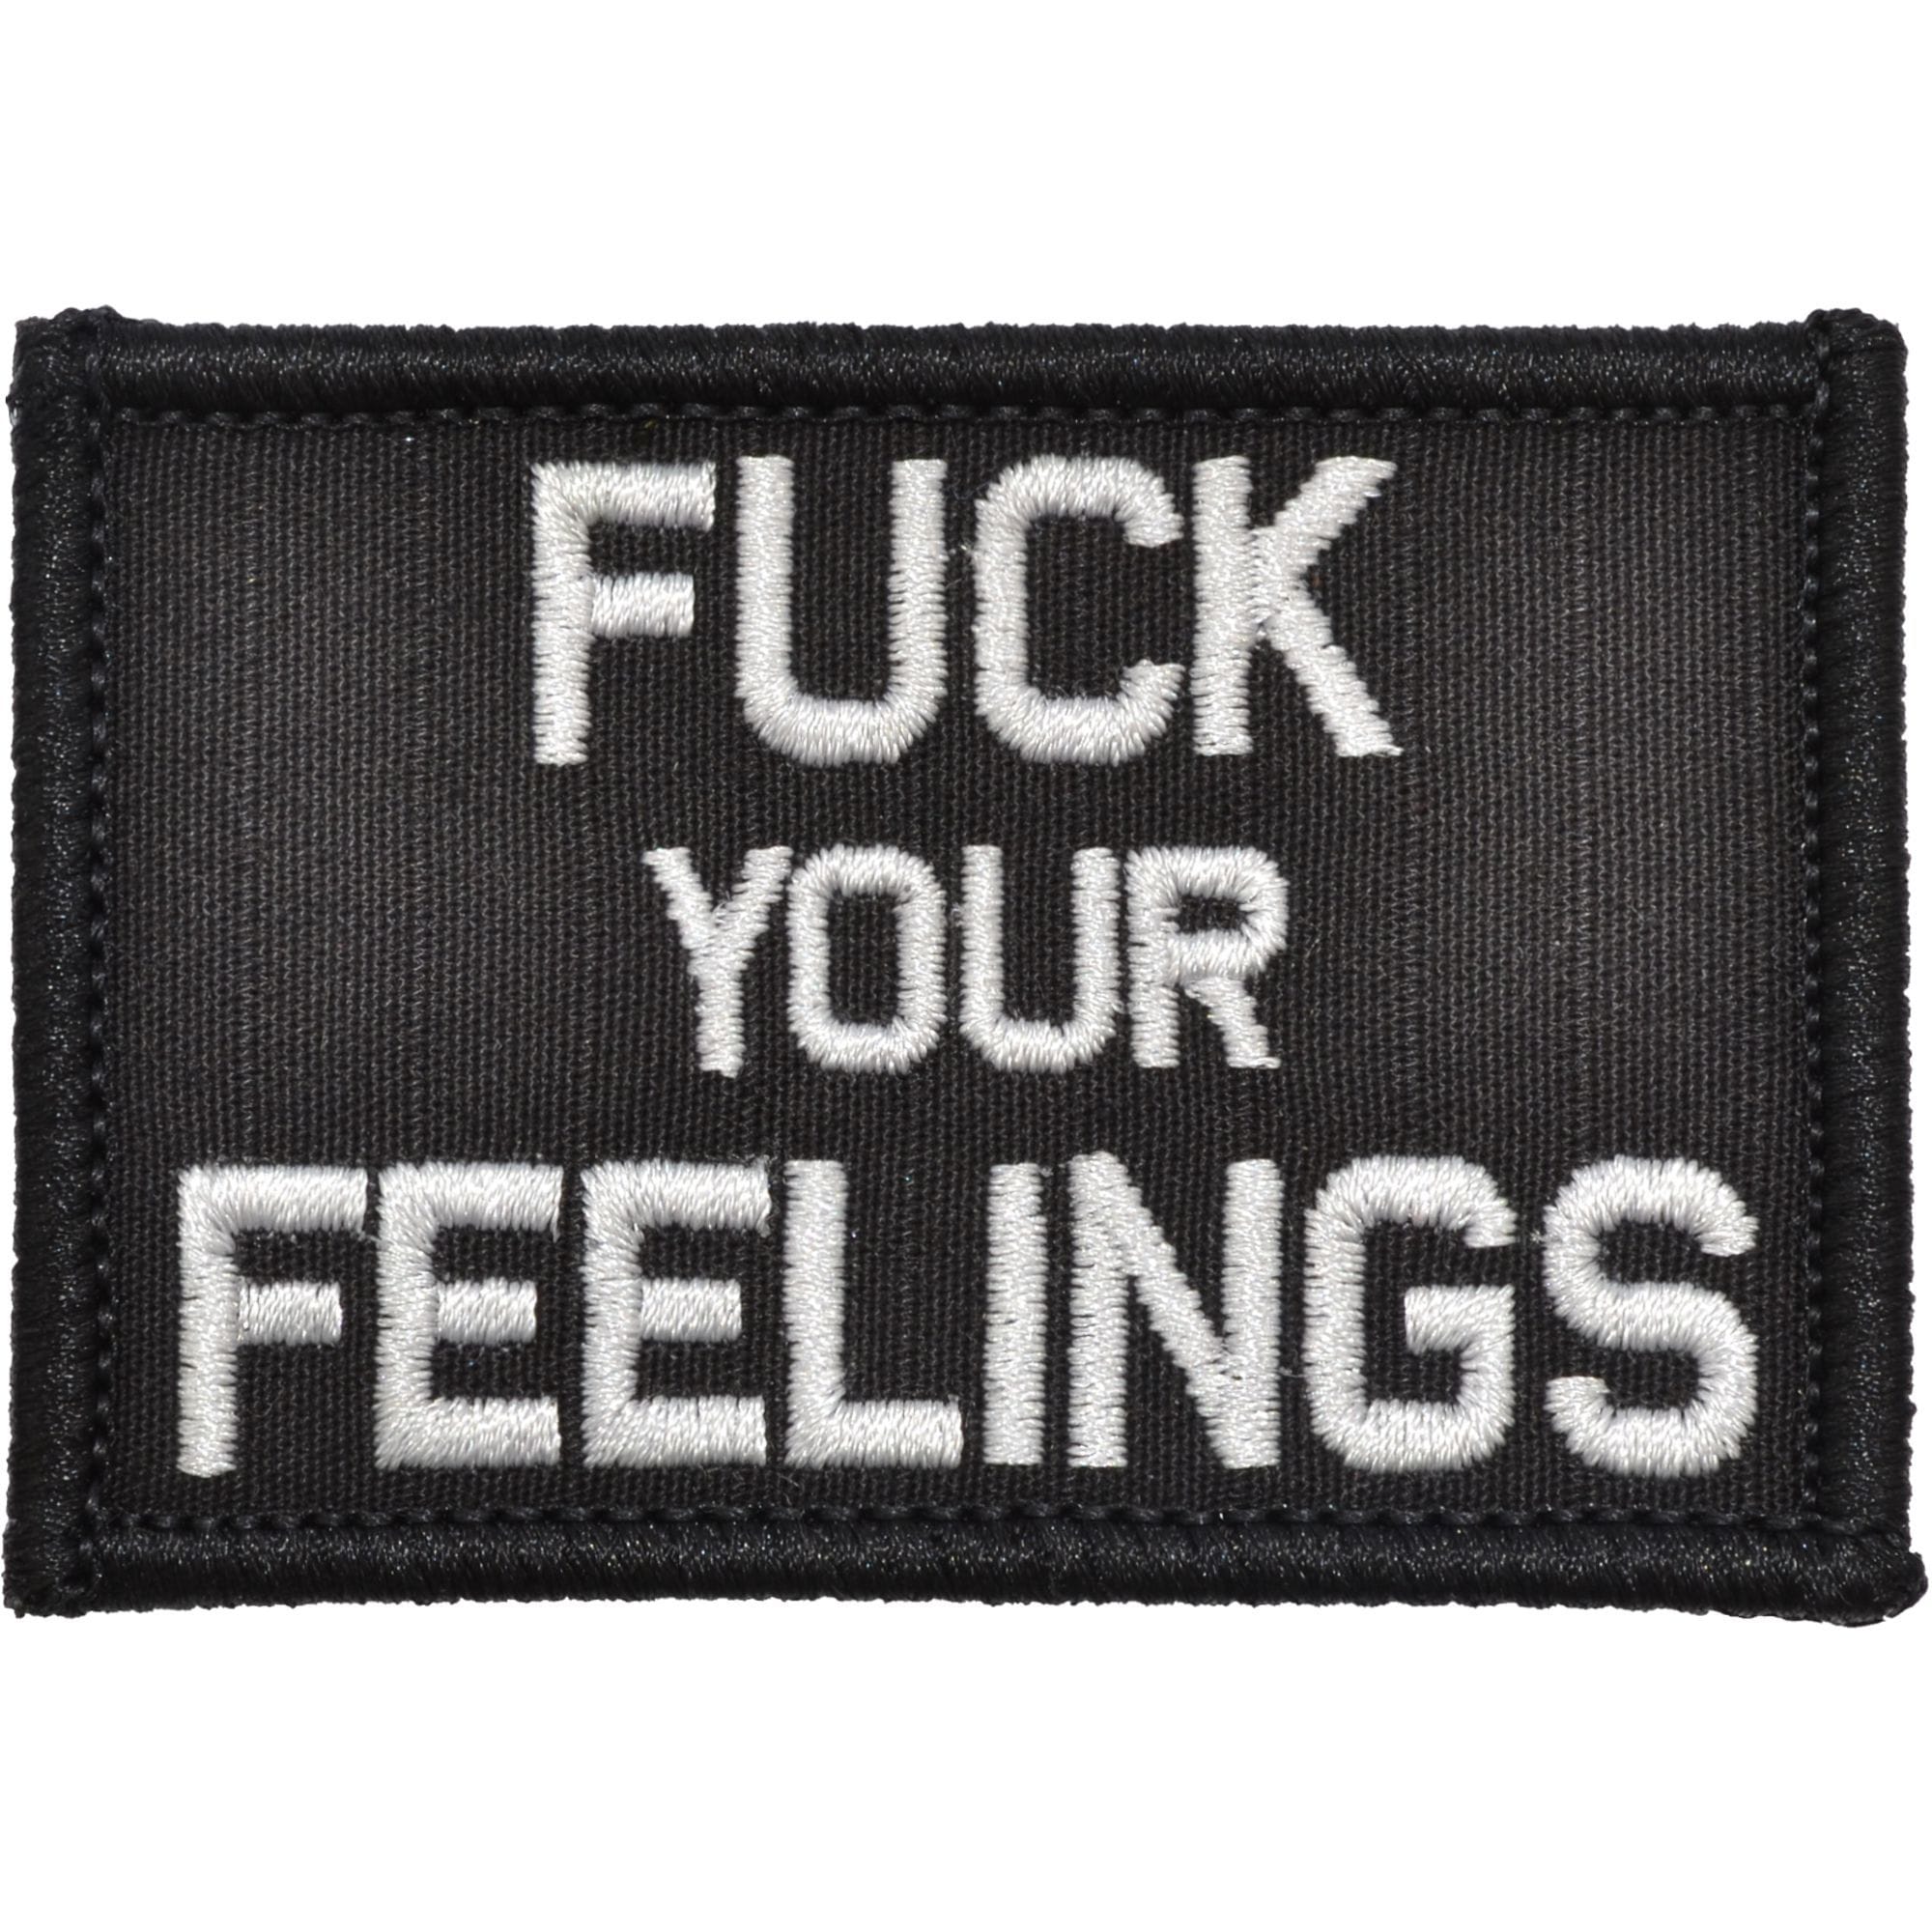 Tactical Gear Junkie Patches Black Fuck Your Feelings - 2x3 Patch